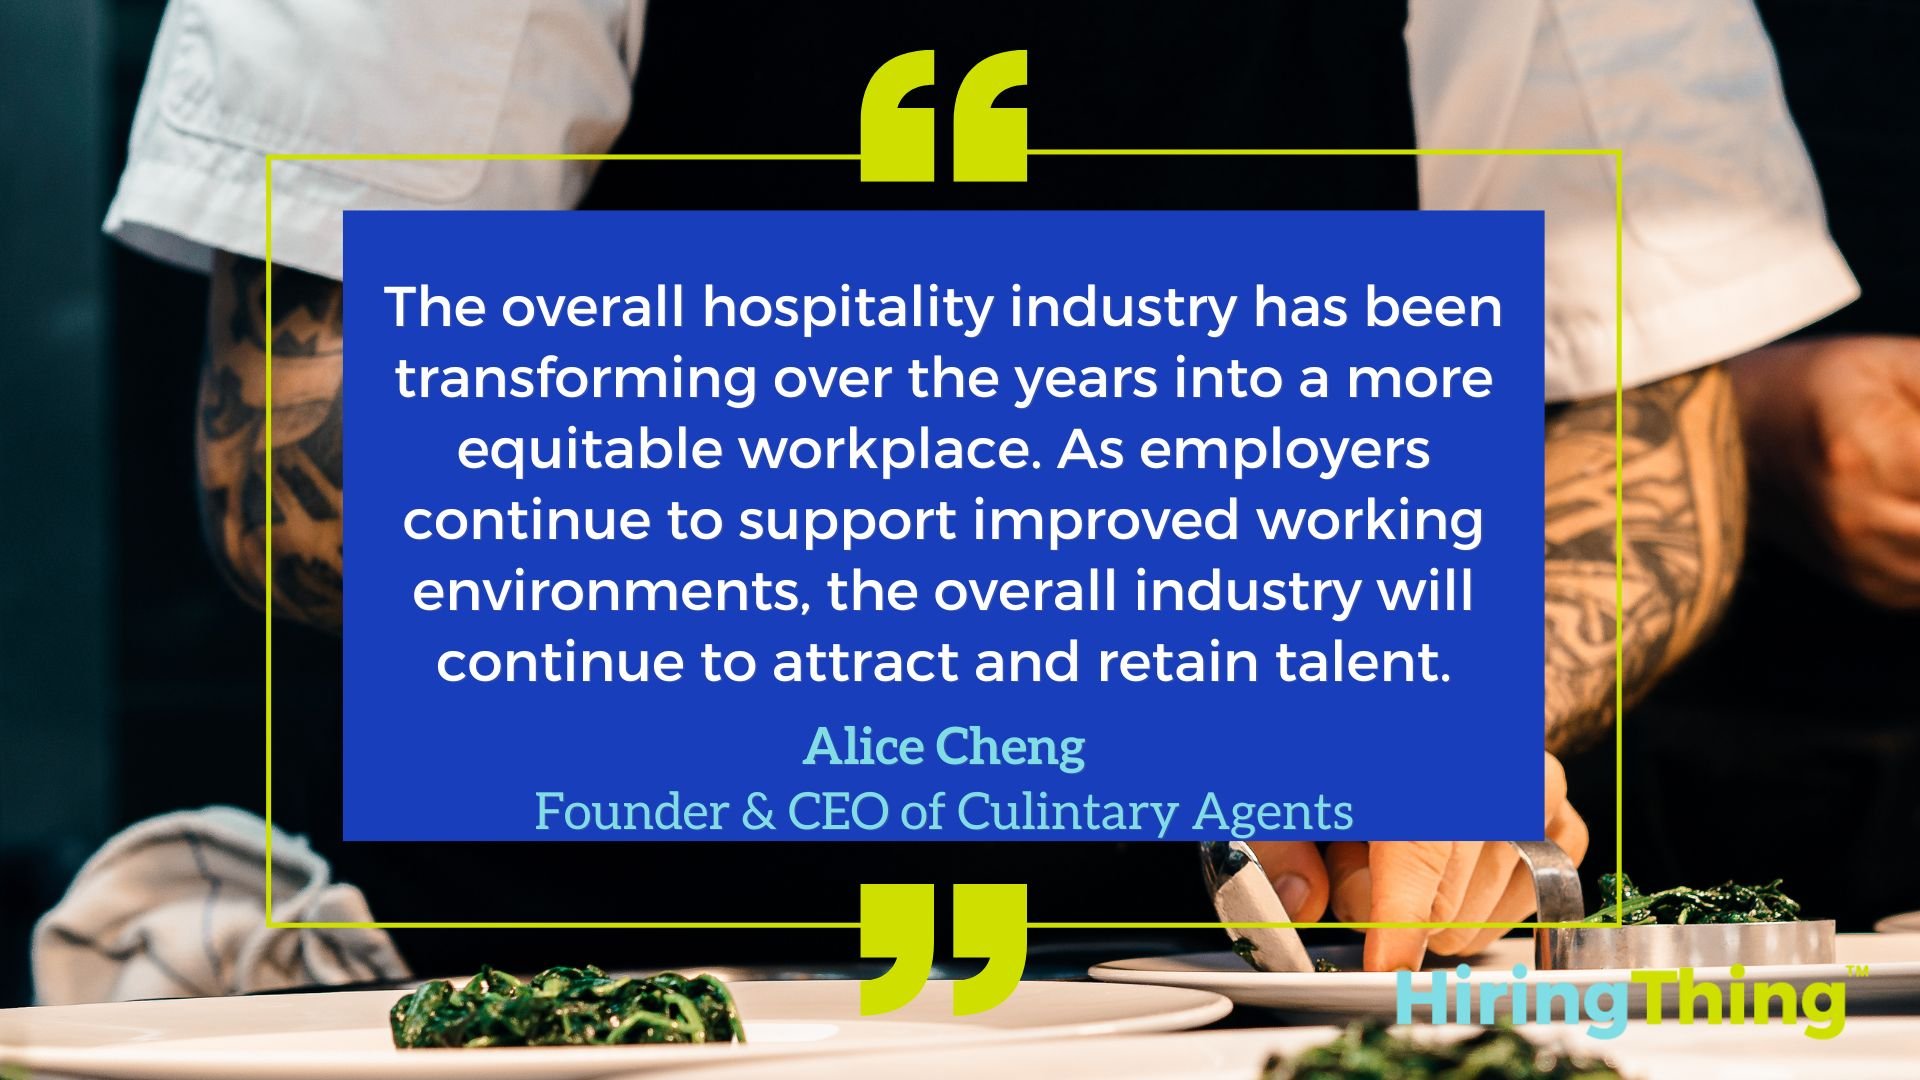 The overall hospitality industry has been transforming over the years into a more equitable workplace. As employers continue to support improved working environments, the overall industry will continue to attract and retain talent. - Alice Cheng, Founder and CEO of Culinary Agents